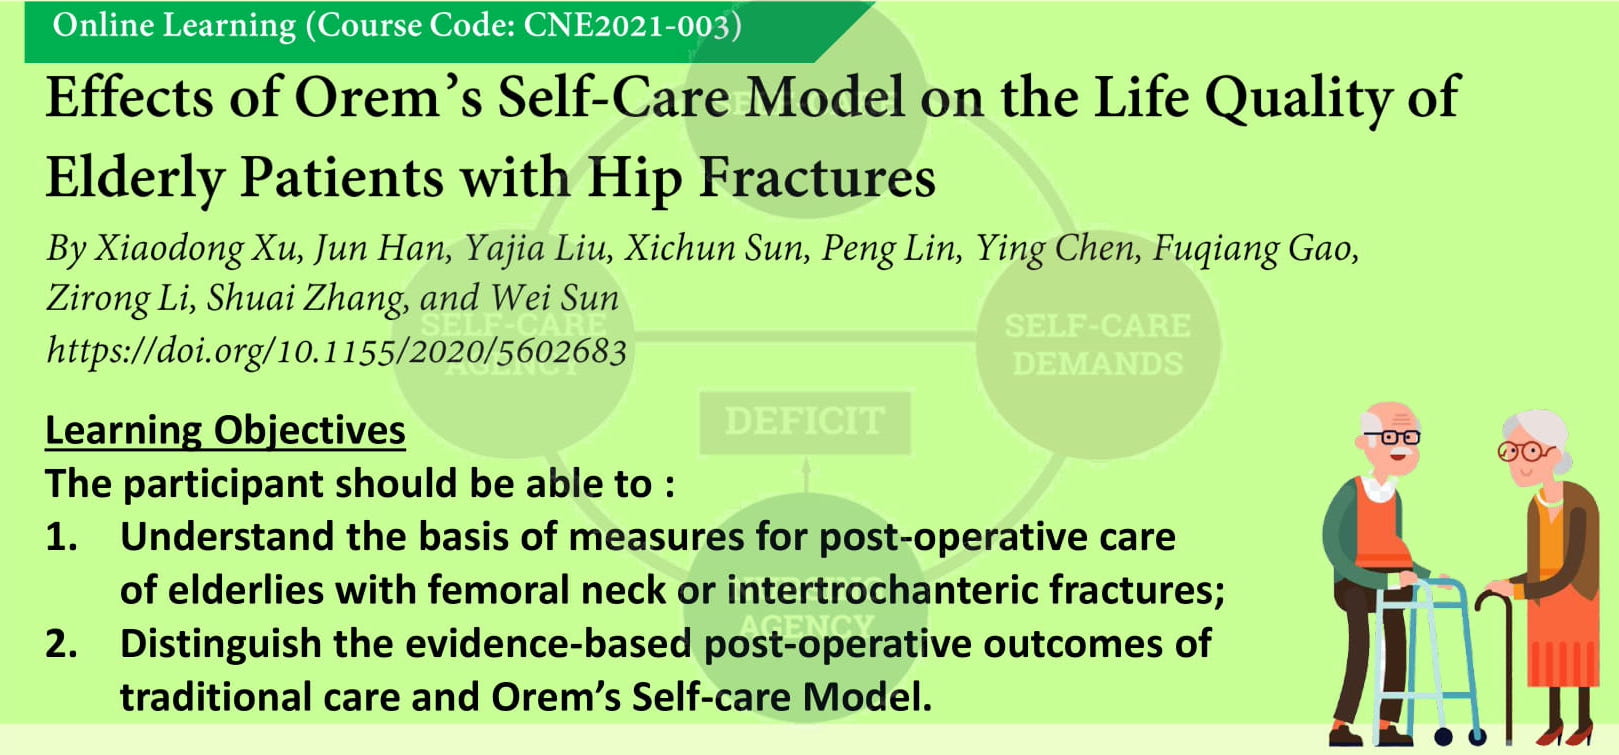 Effects of Orem’s Self-Care Model on the Life Quality of Elderly Patients with Hip Fractures